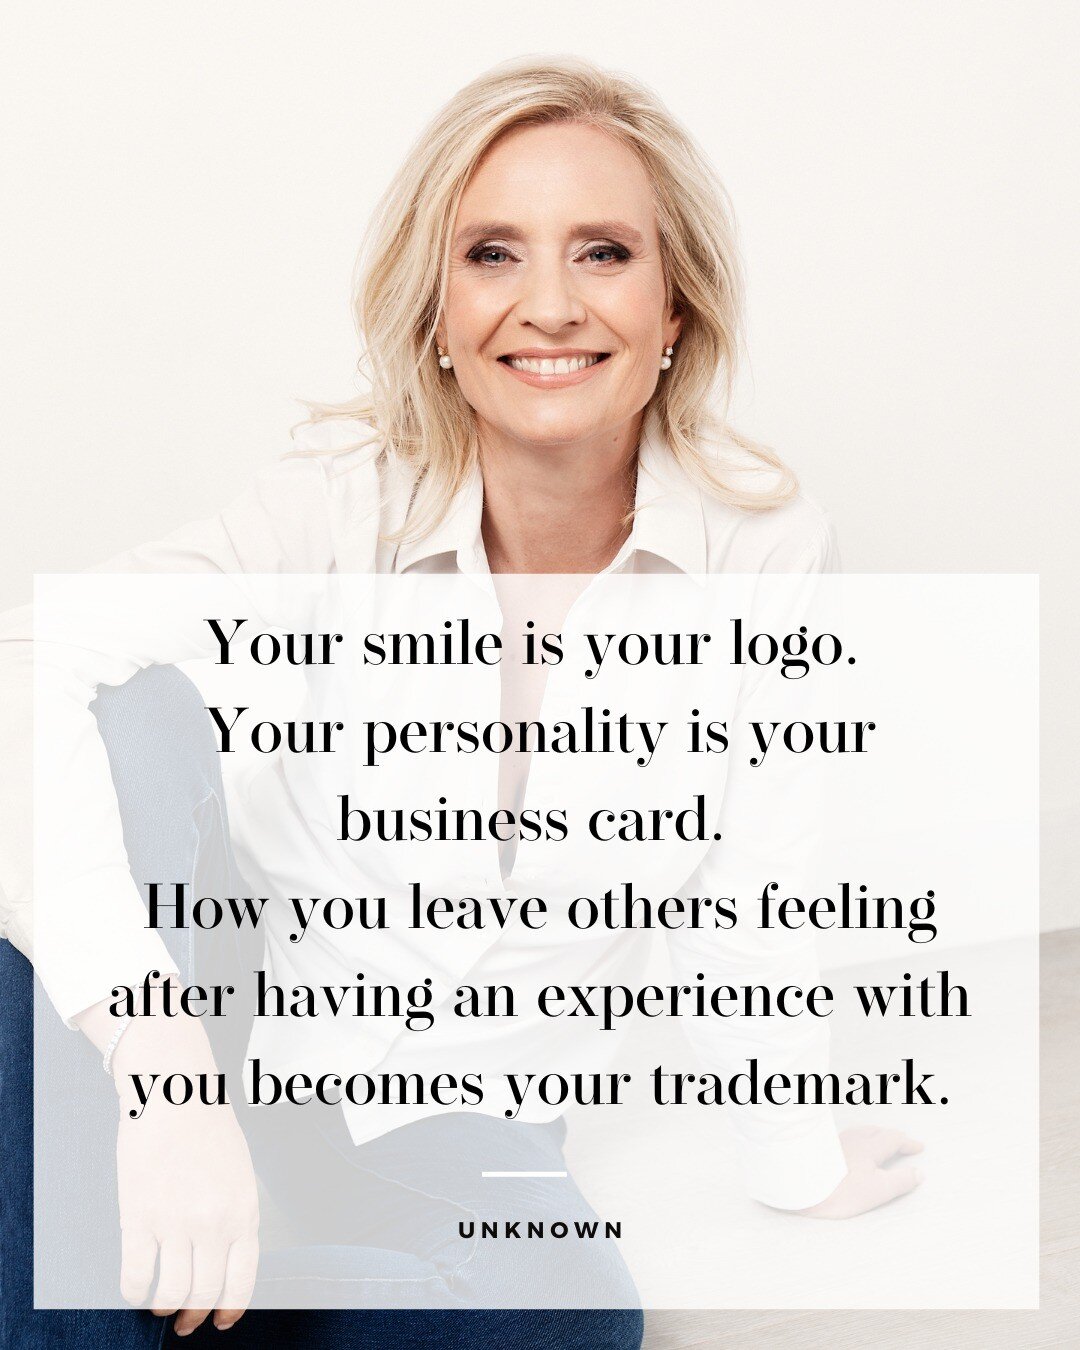 I love this quote ❤

The headshots and branding photos you use for your business are so important! They give a first impression before you have even had a chance to say hello. 😀

What does your branding images say about you?
Do they need a refresh?
